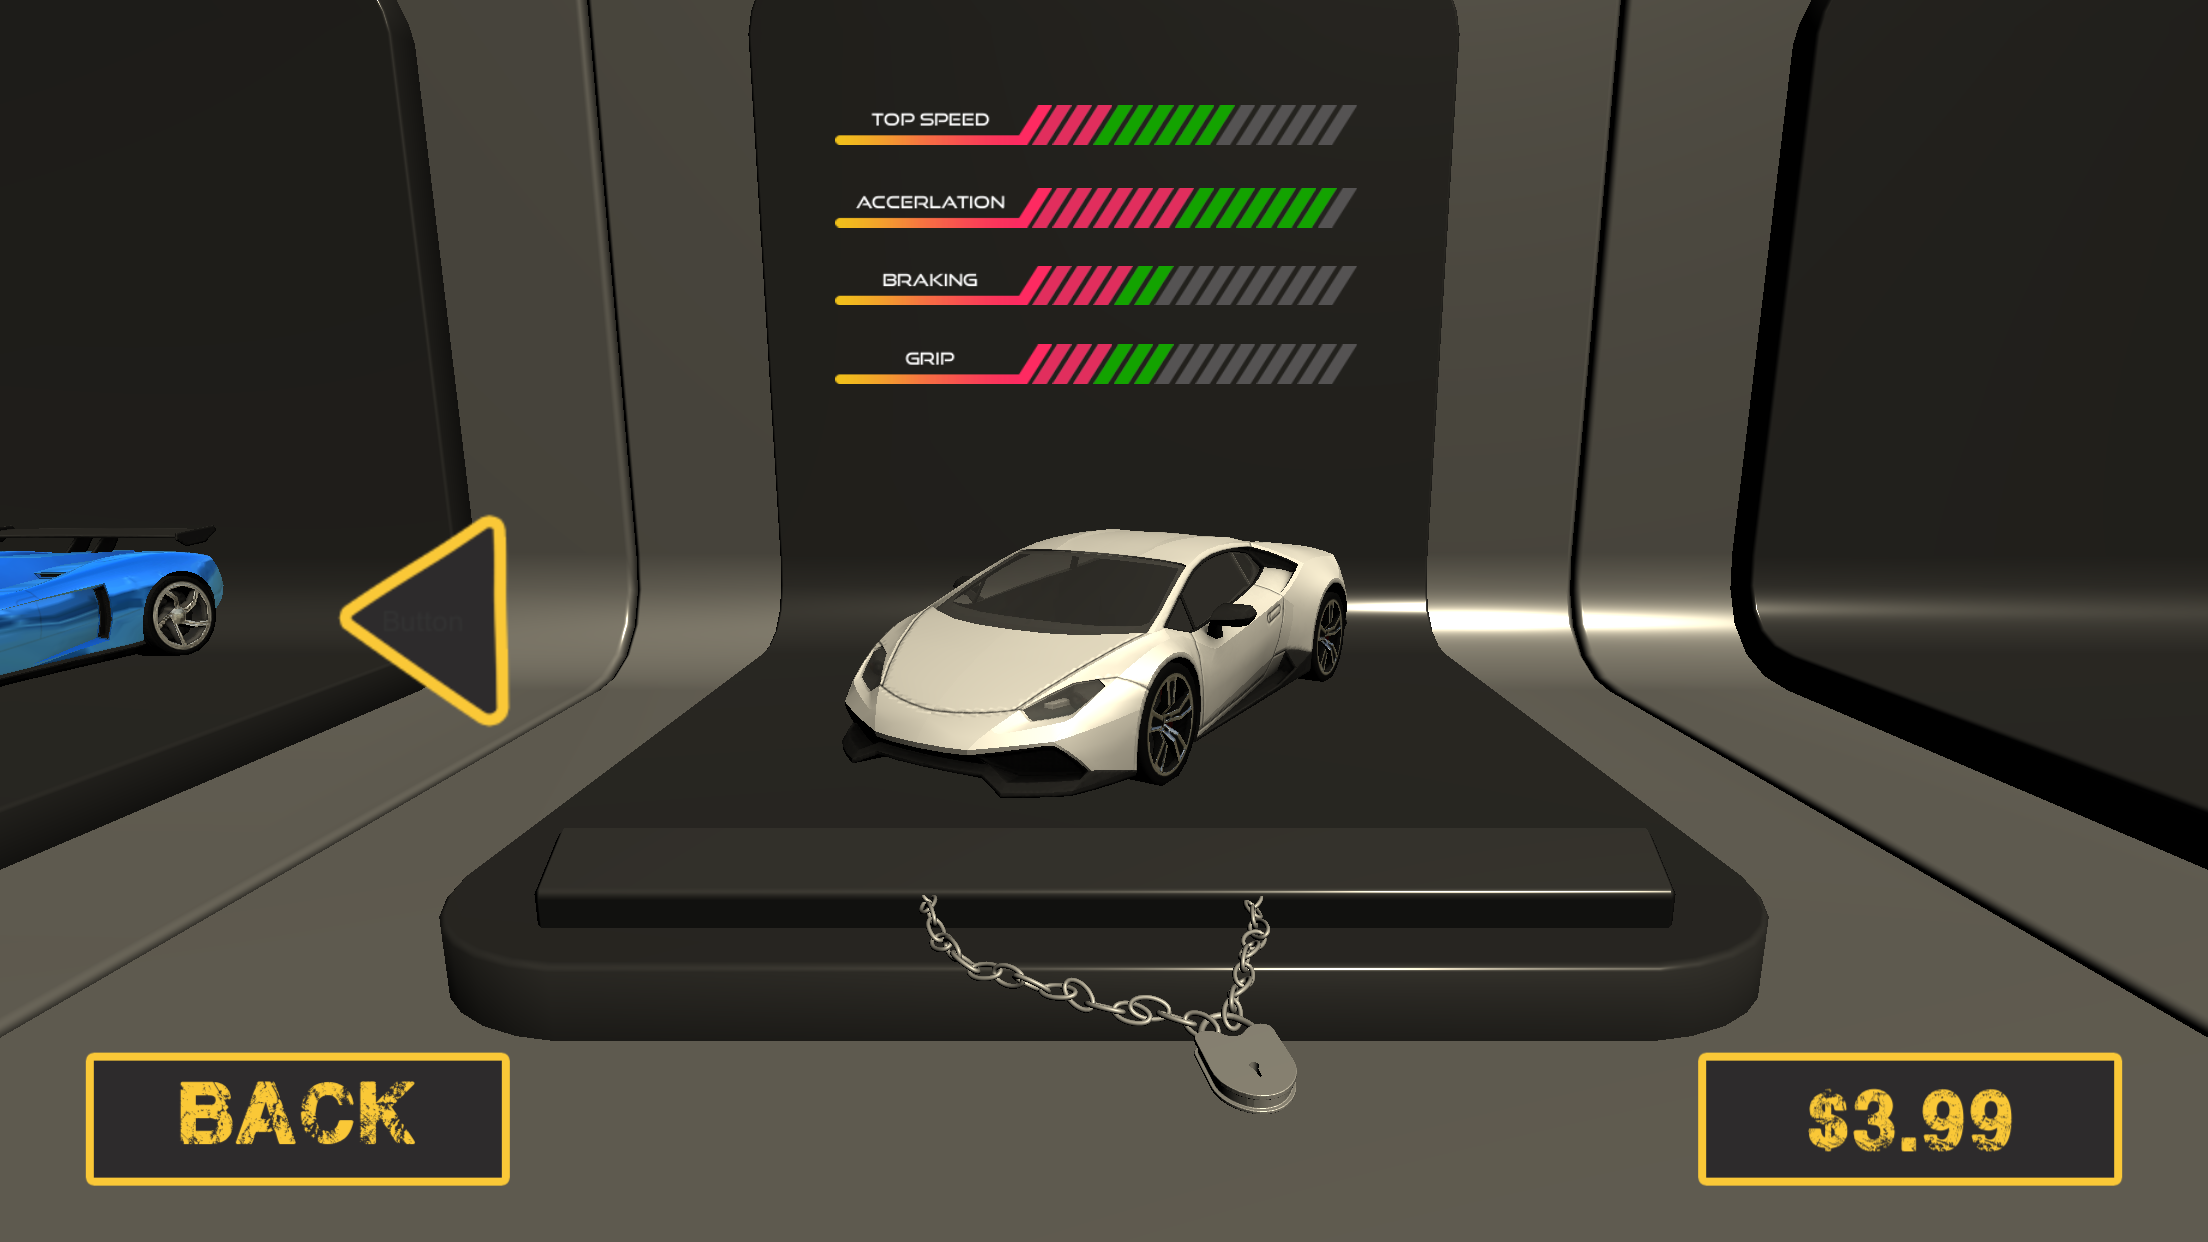 buy-sports-car-driving-school-simulator-unity3d-android-ios-source-code-sell-my-app